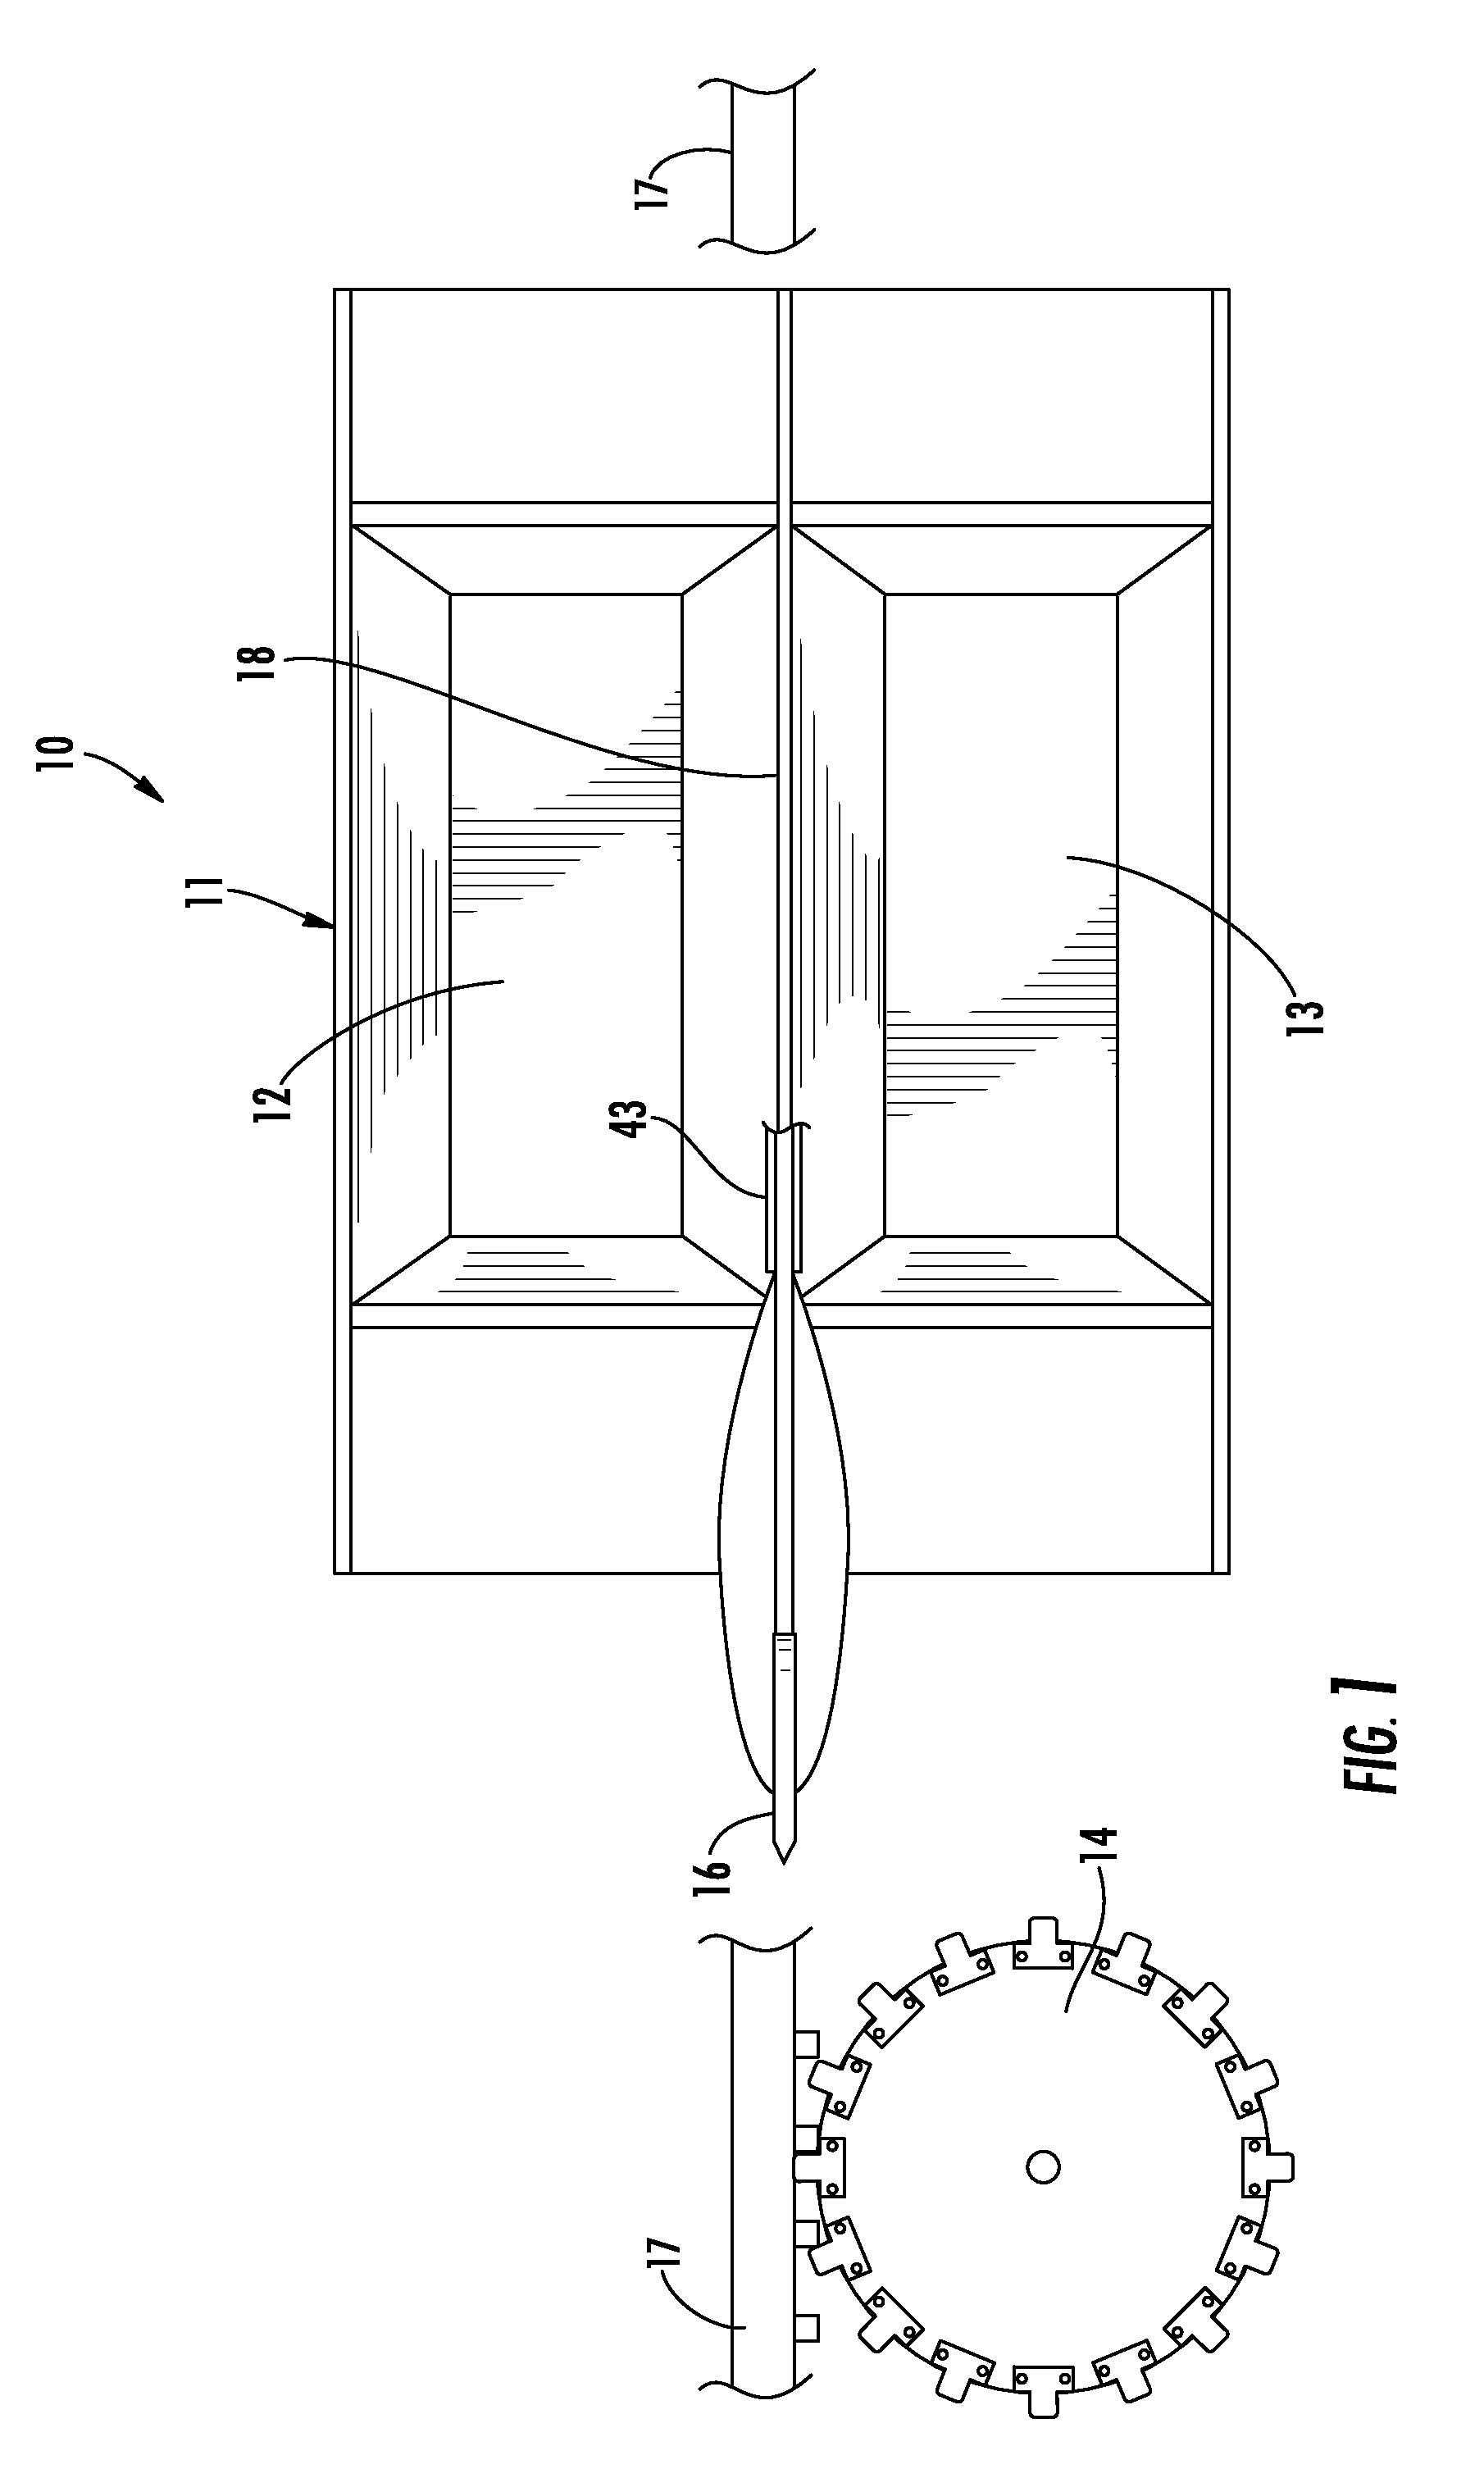 Apparatus and method for stunning poultry with minimum damage to the poultry products